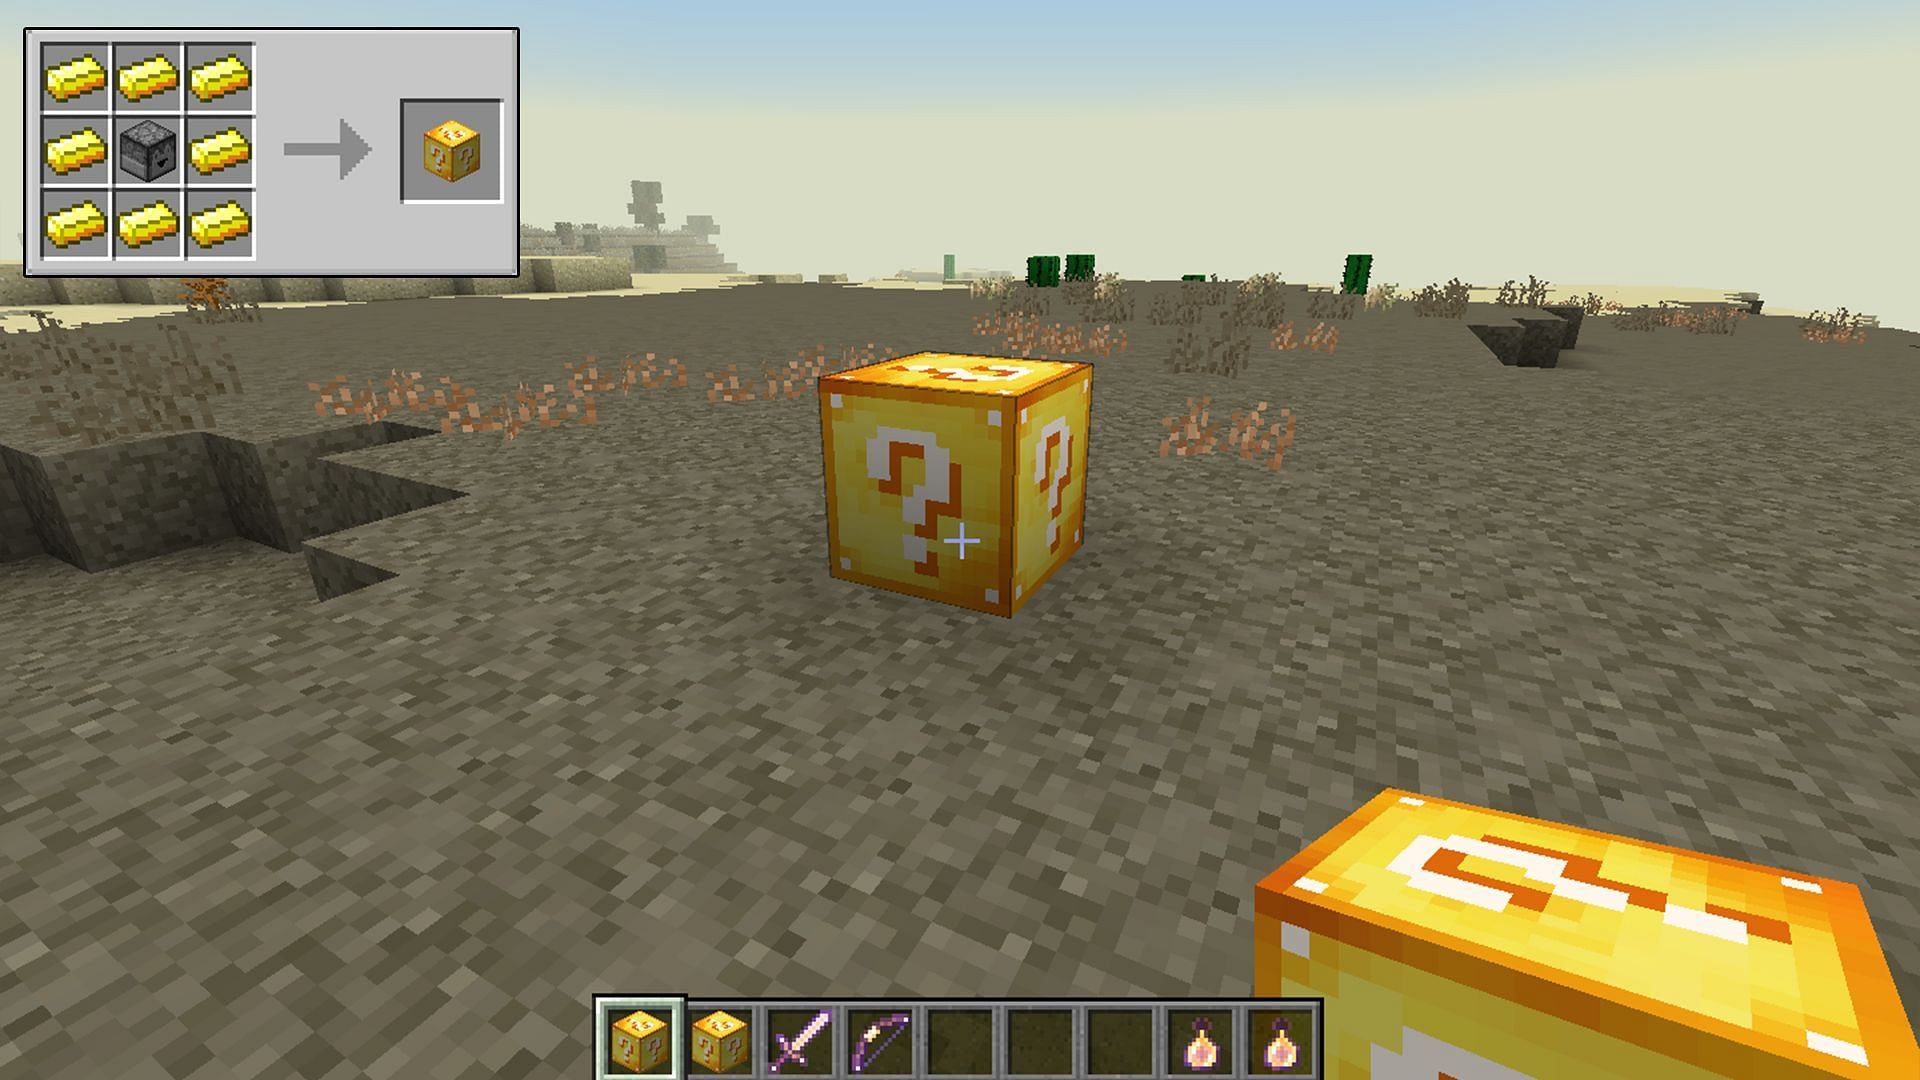 This is the original lucky block mod for the game (Image via minecraftmods.com)